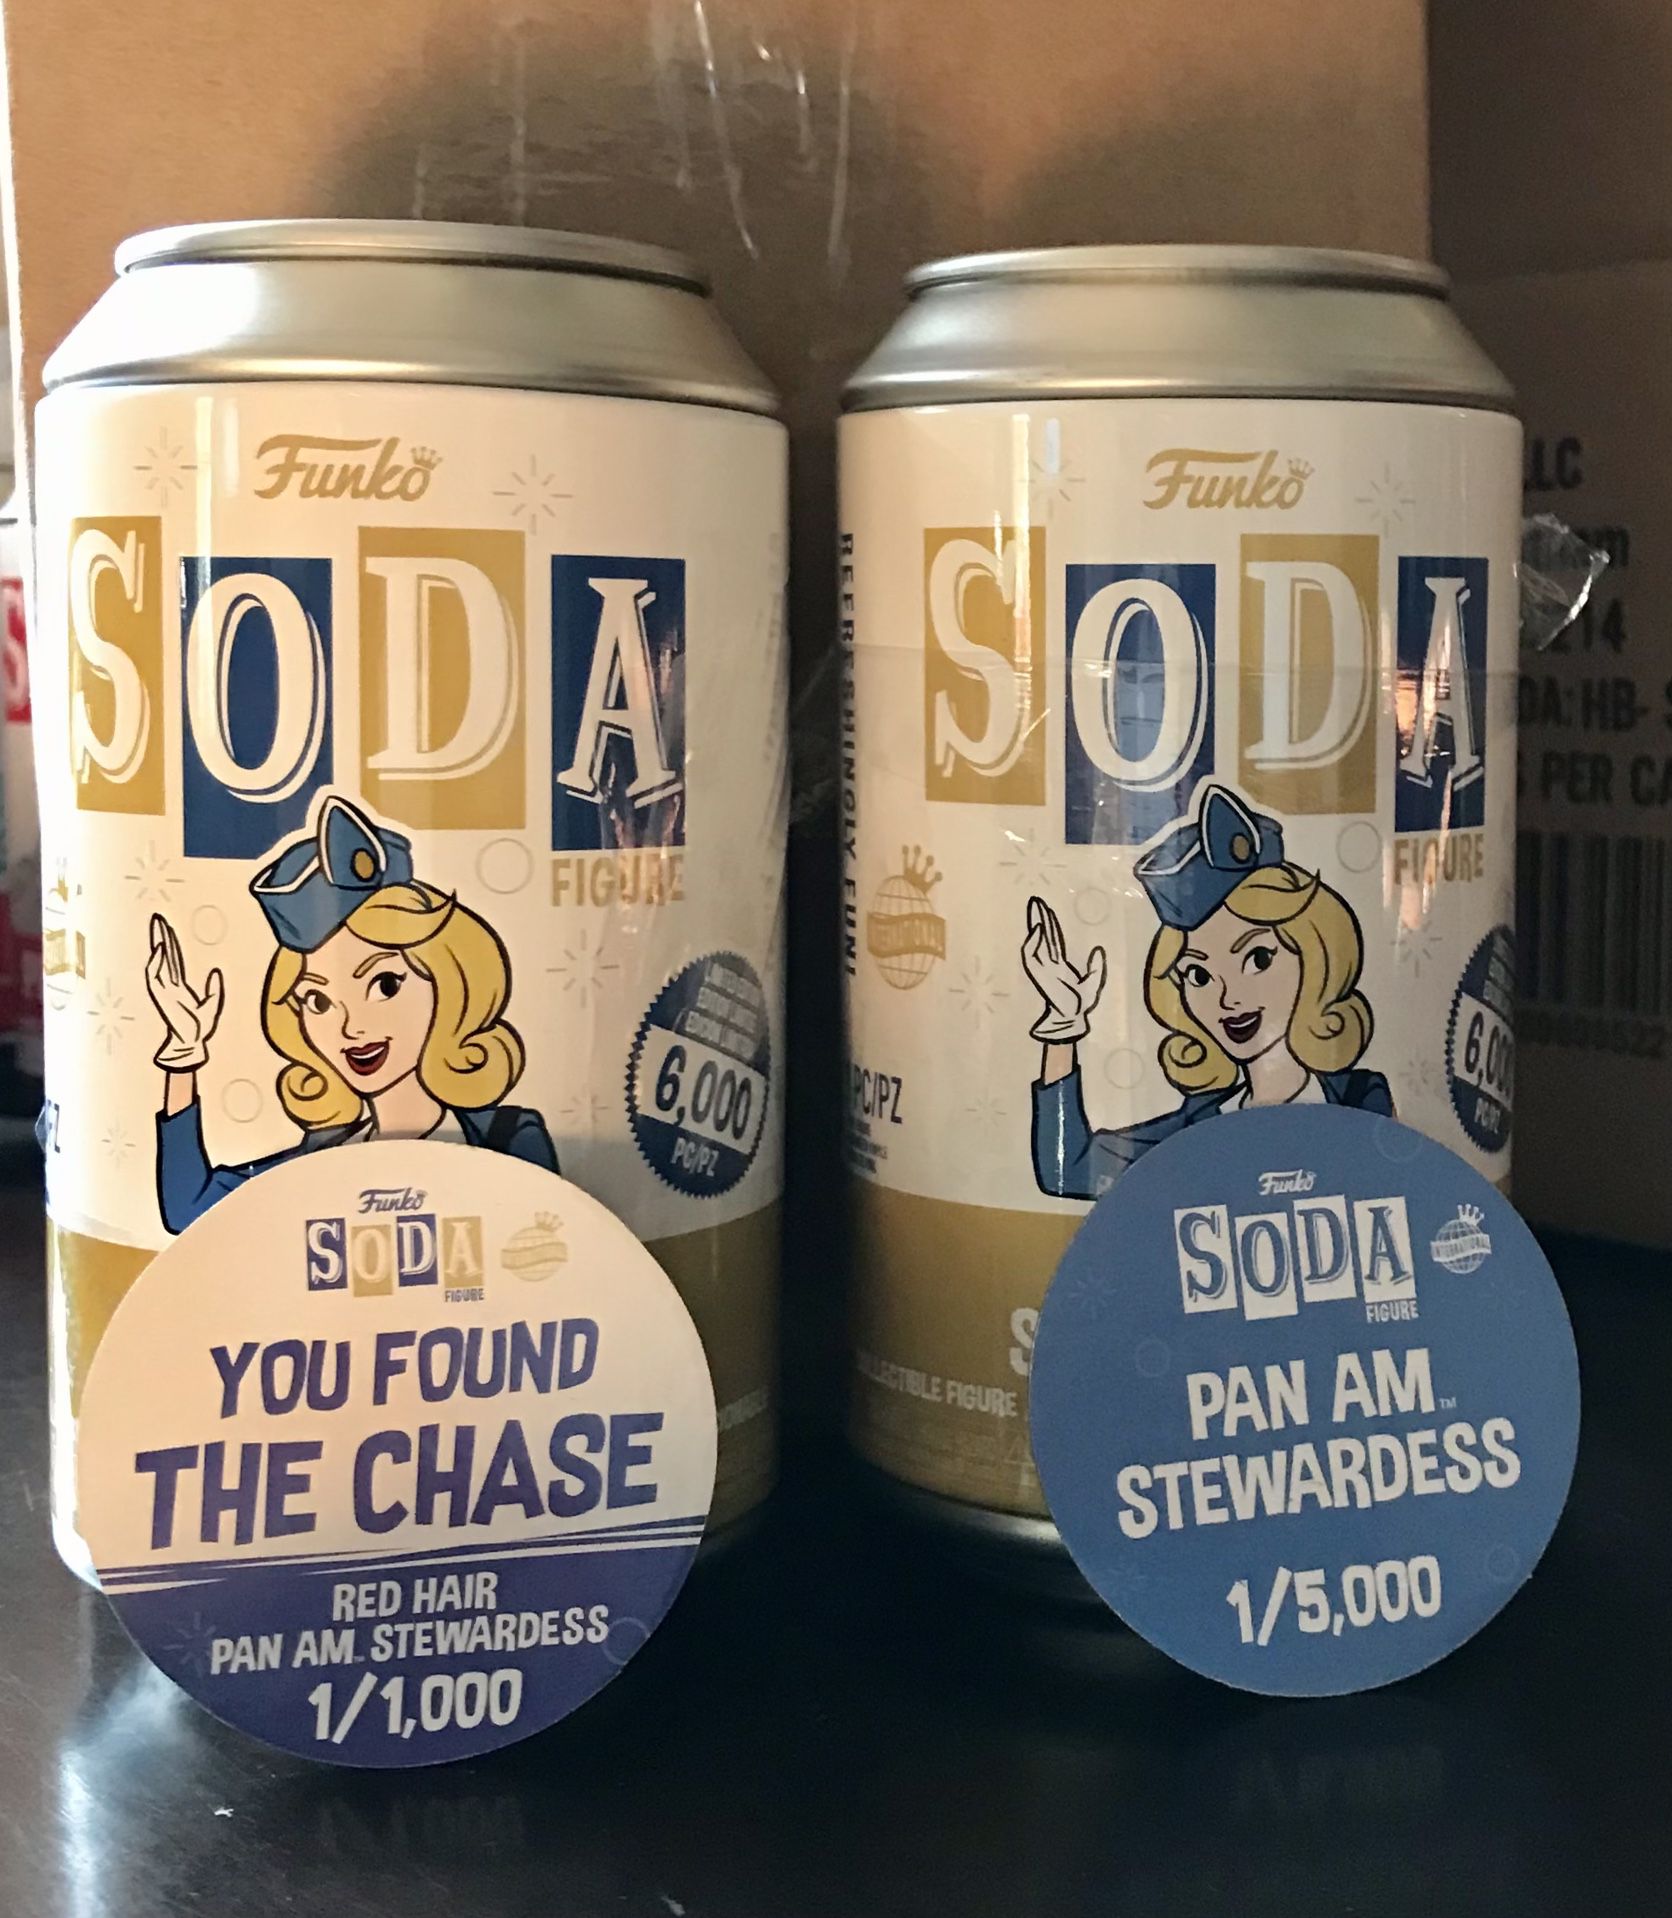 Funko SODA POP! Pan Am Stewardess Chase Red Hair & Common NEW! Cans are Opened, Bags are Sealed!